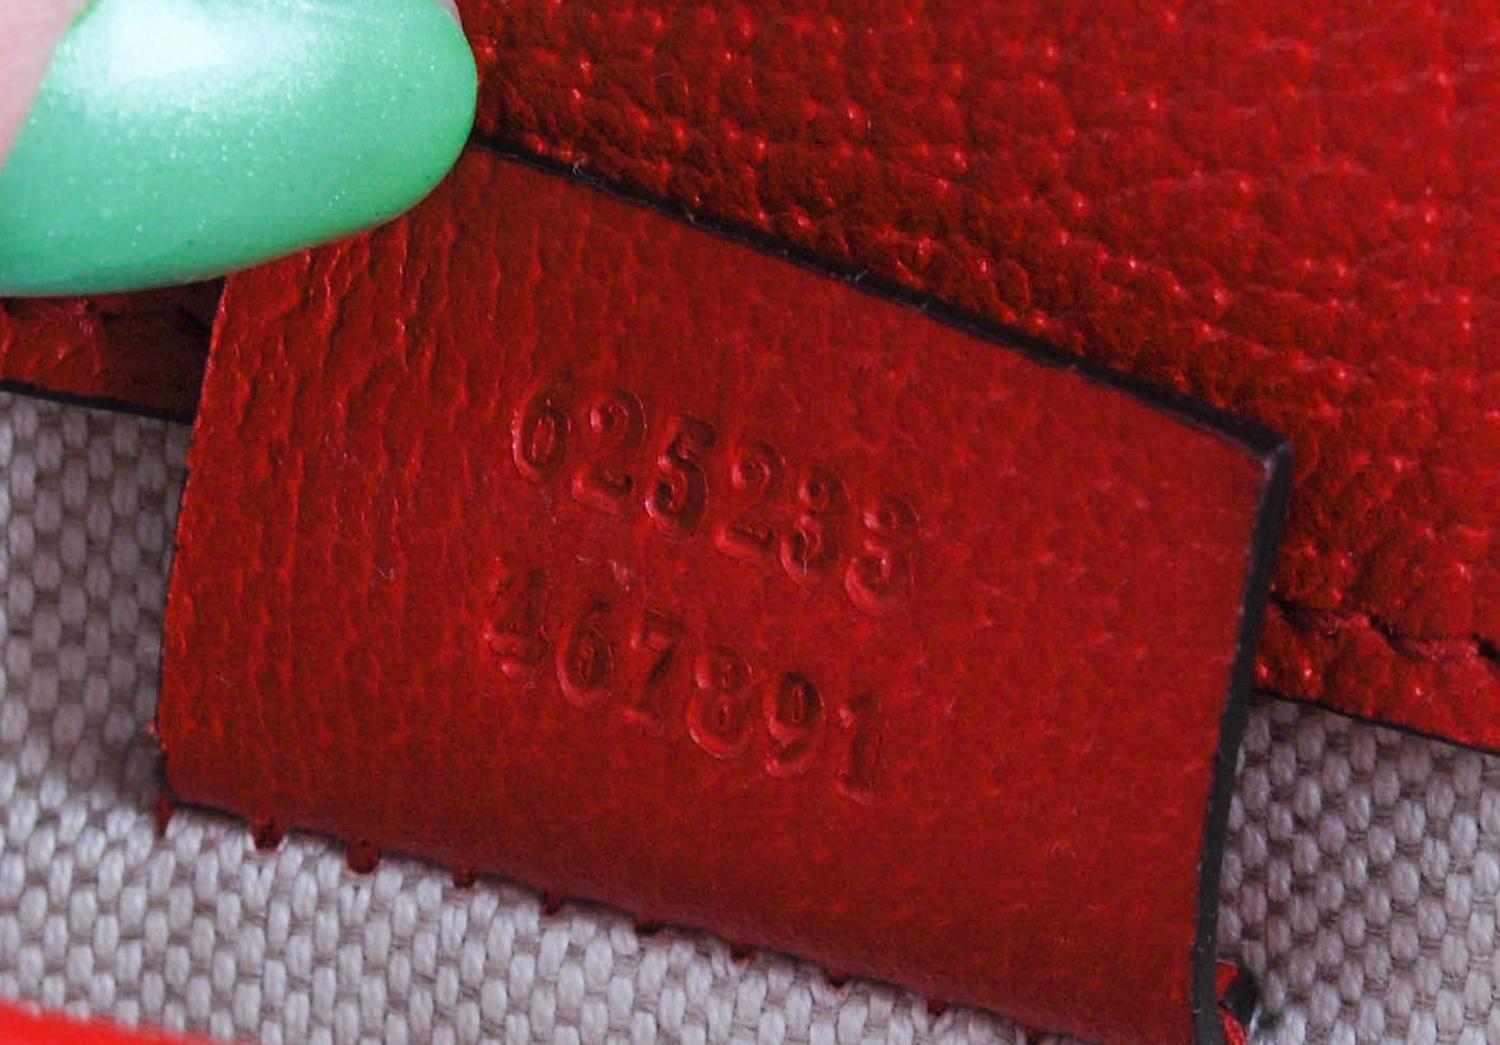 Item for sale is 100% genuine Gucci Monogram Women Waist Bag S044
Color: Brown/Red
(An actual color may a bit vary due to individual computer screen interpretation)
Material: Leather Details
This bag is great quality item. Rate 10 of 10
Actual 